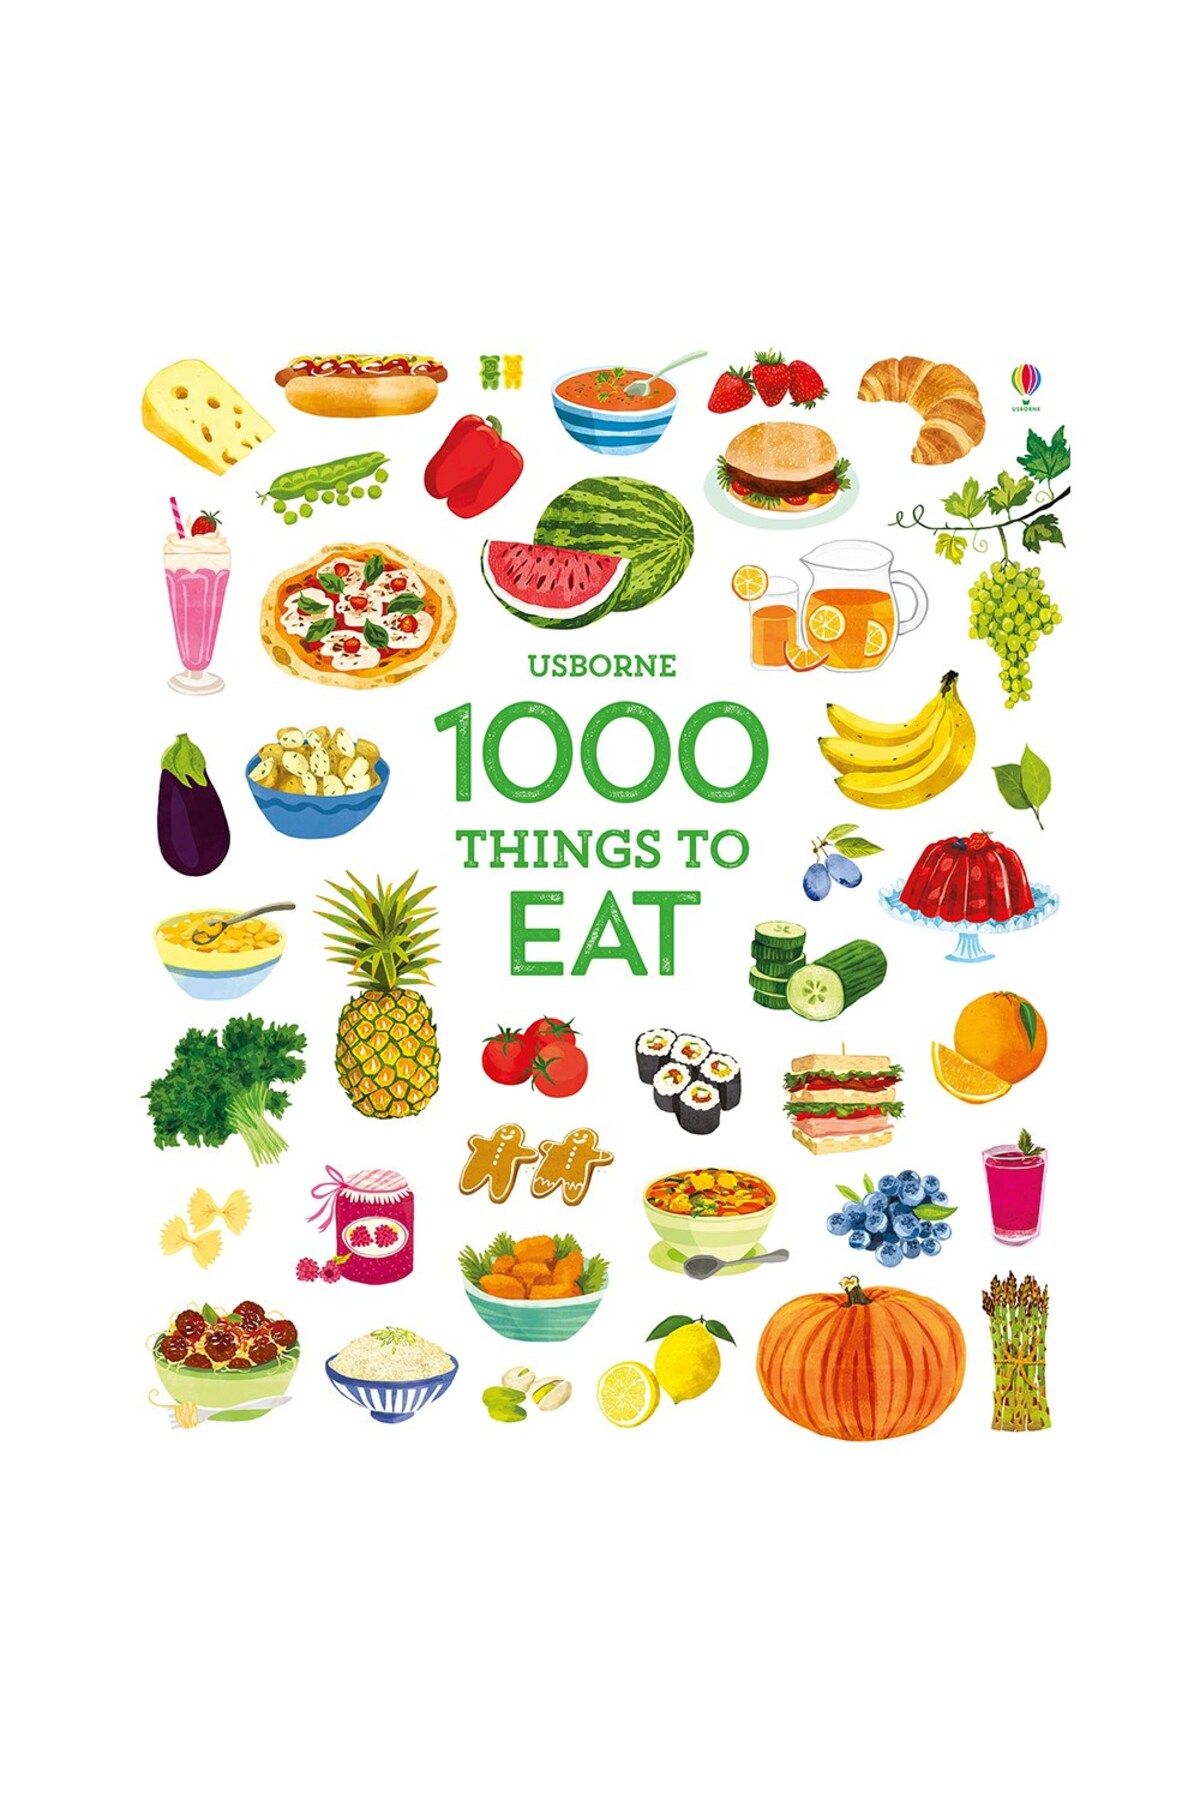 Usborne 1000 Things To Eat